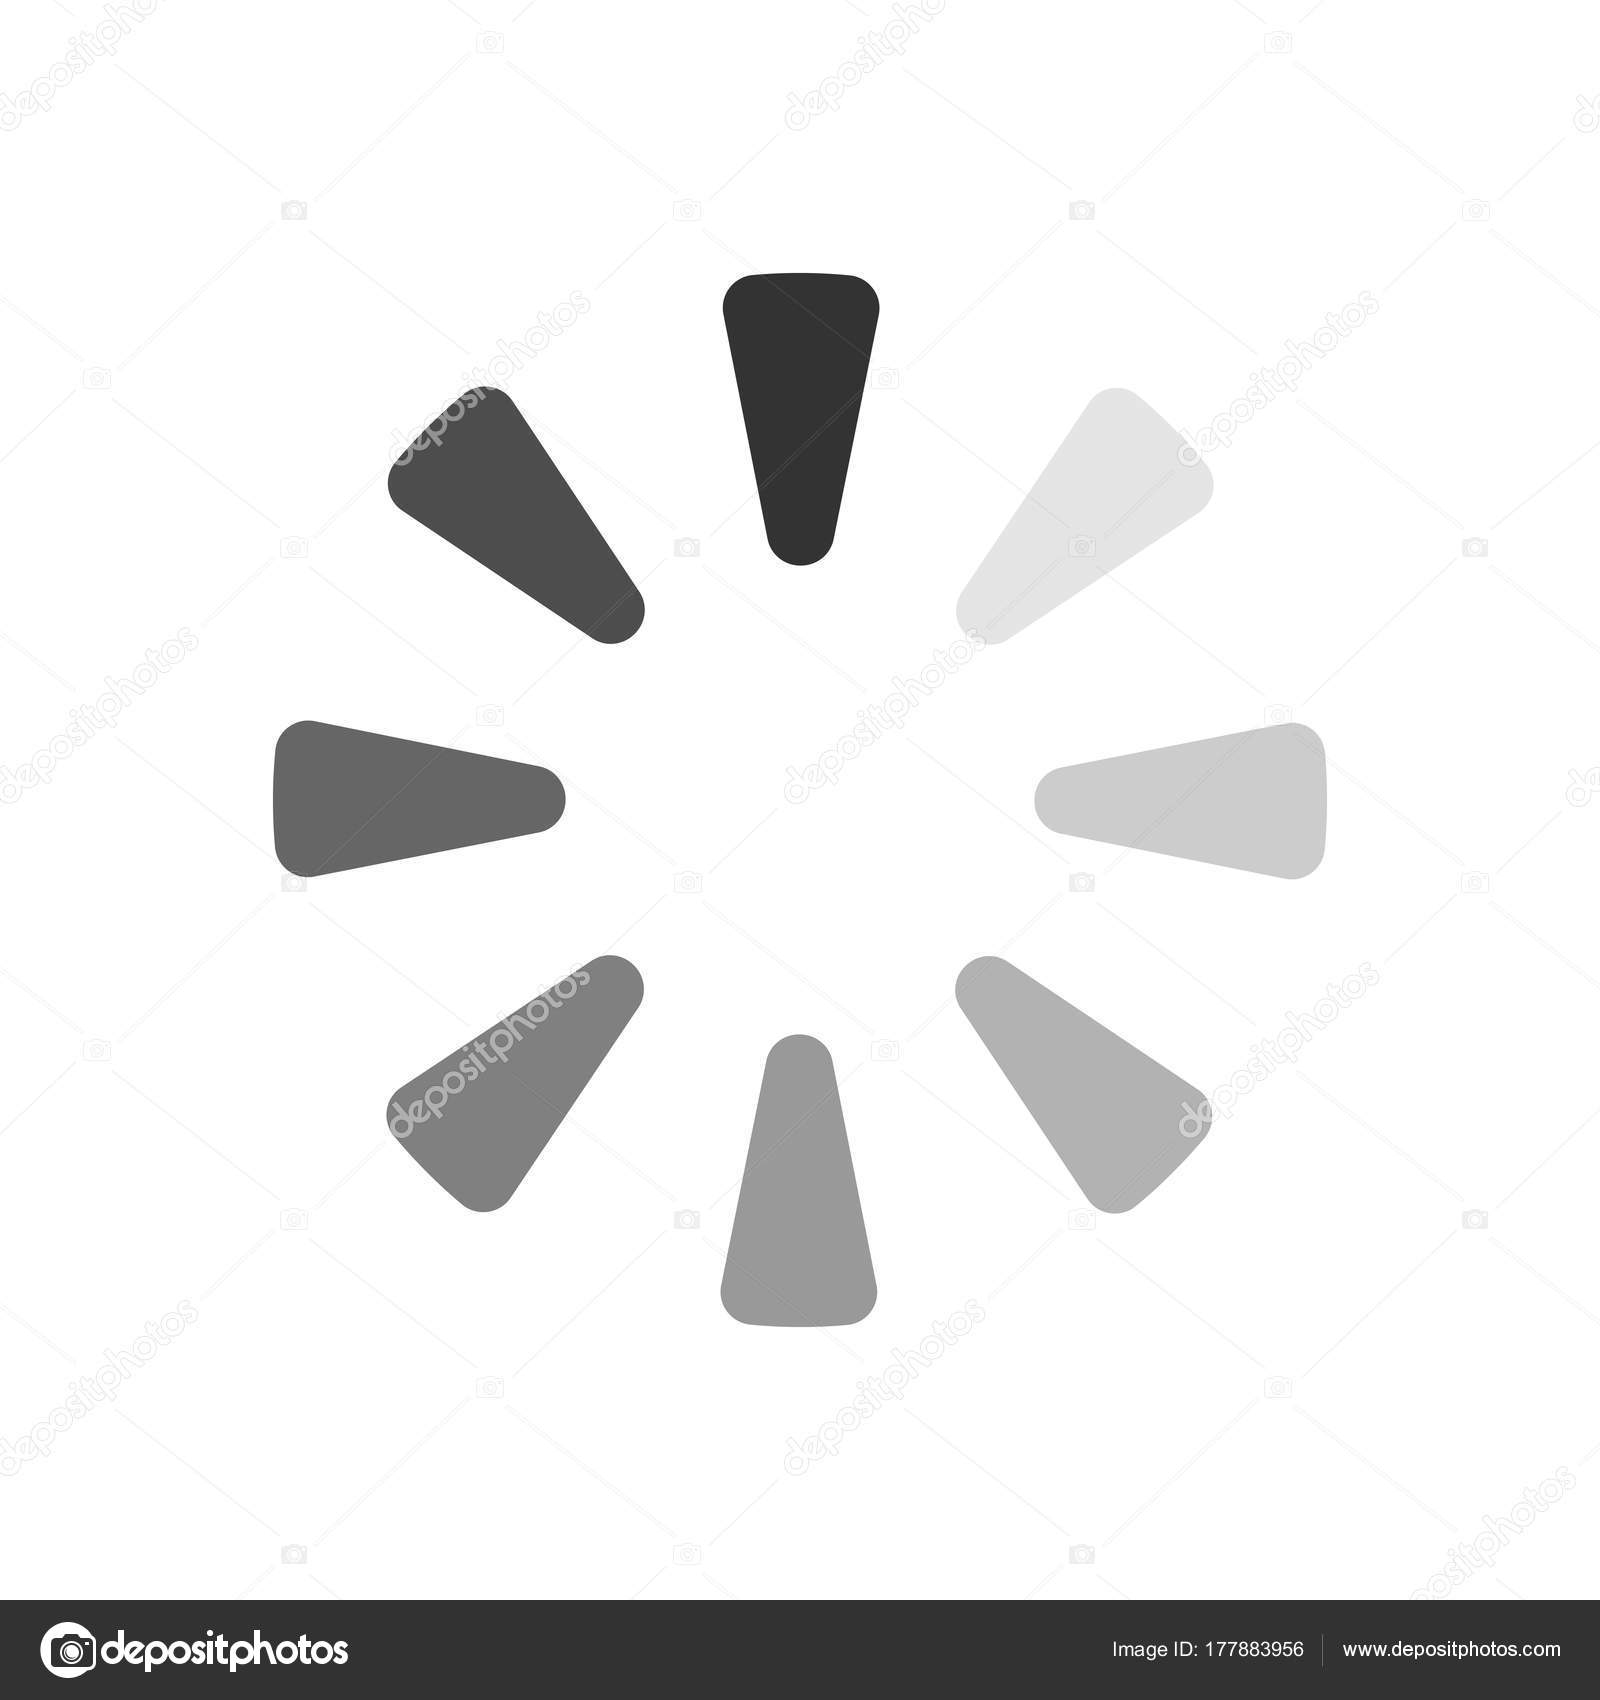 Loading and buffering bar stock photo. Image of interface - 43555622